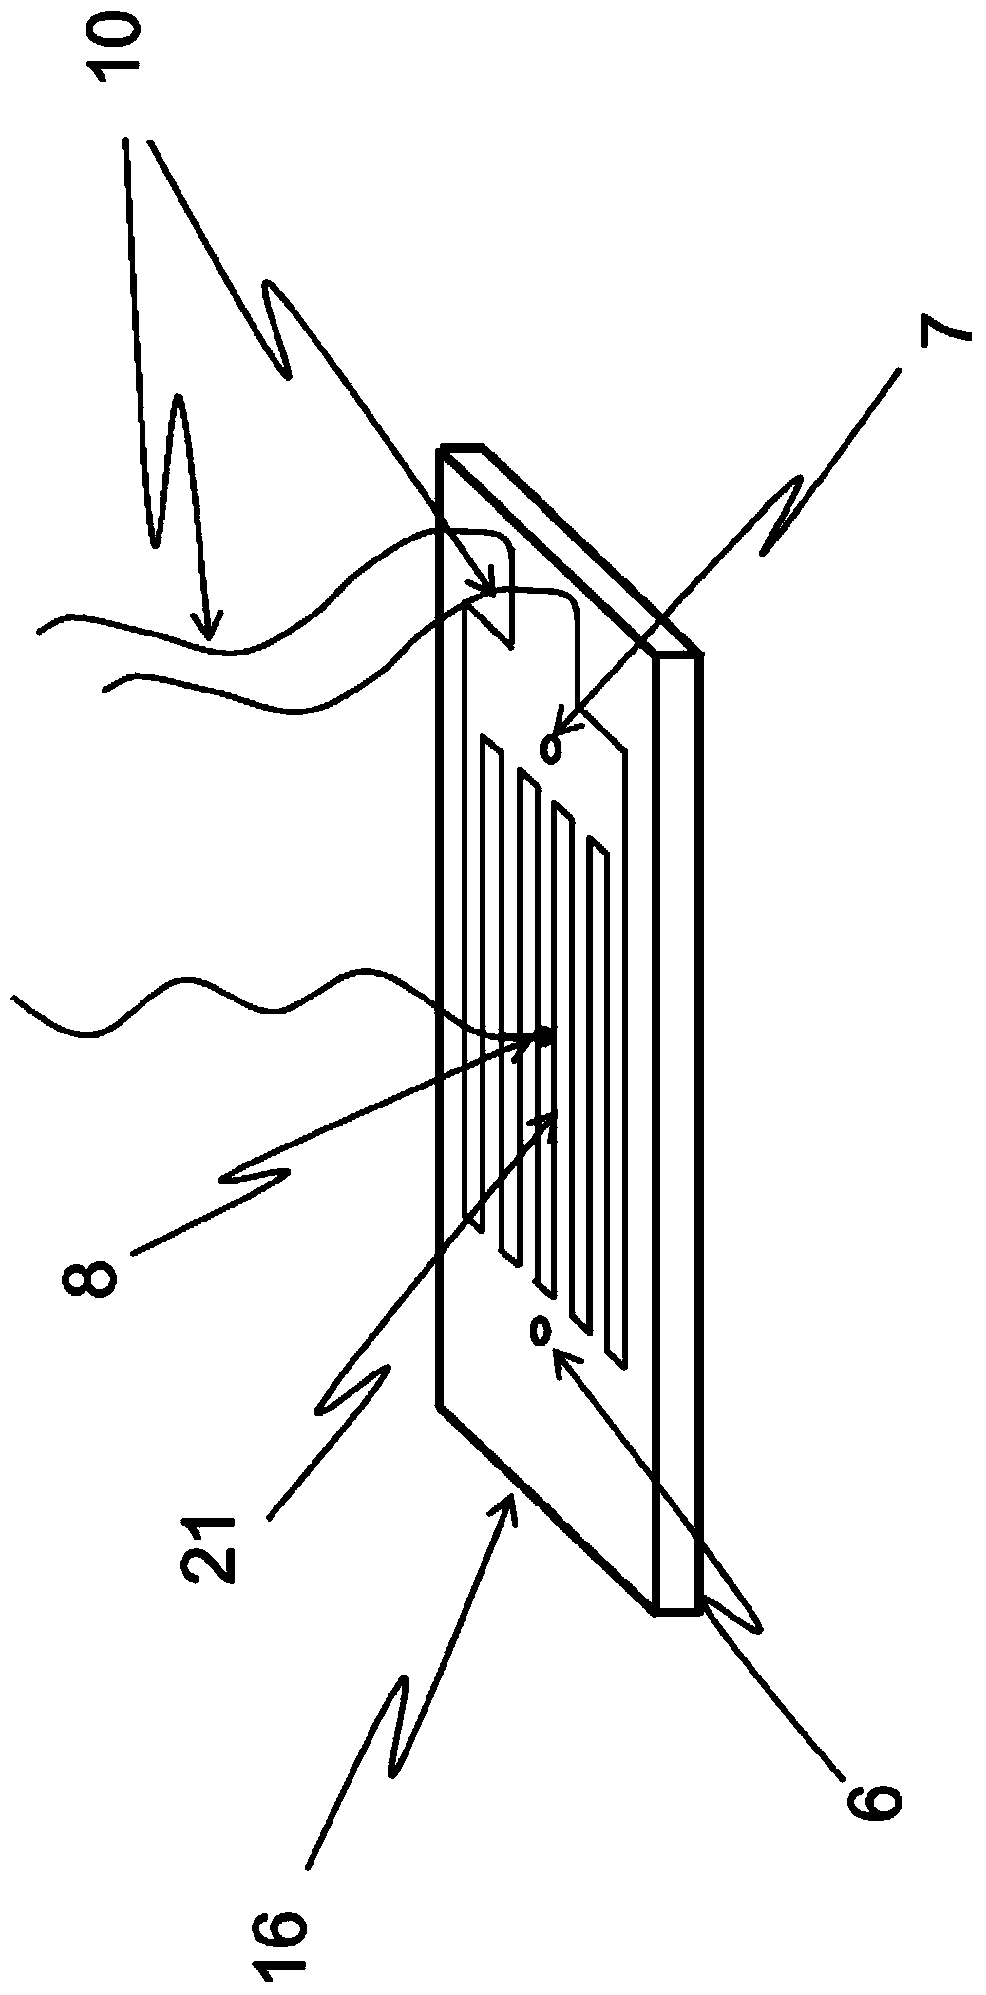 Methods and apparatuses for drying electronic devices